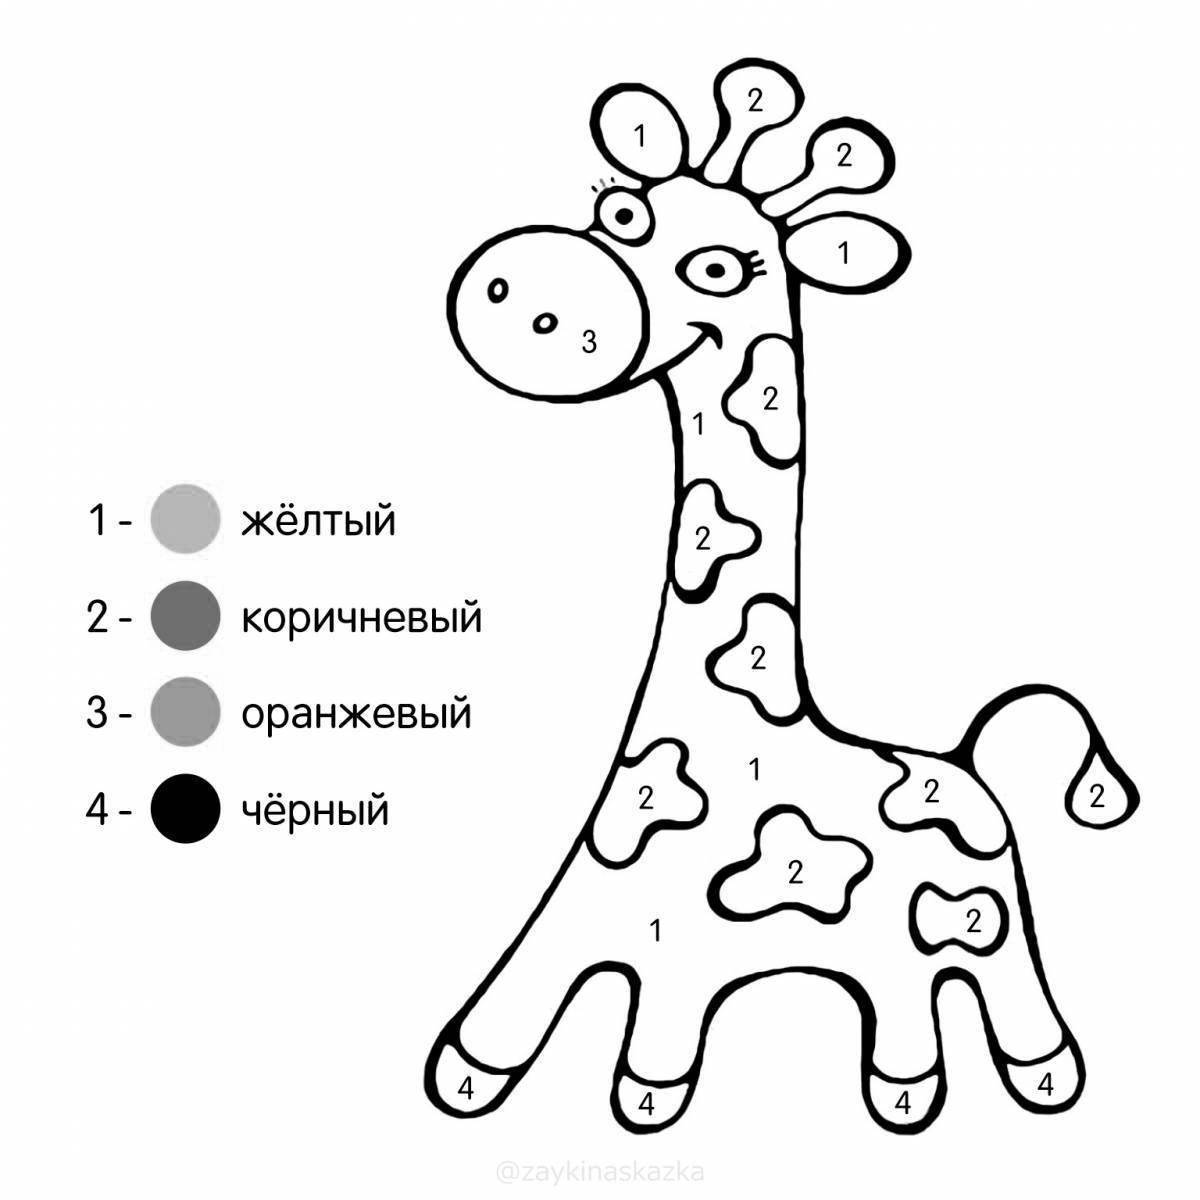 Magic giraffe coloring book for 3-4 year olds